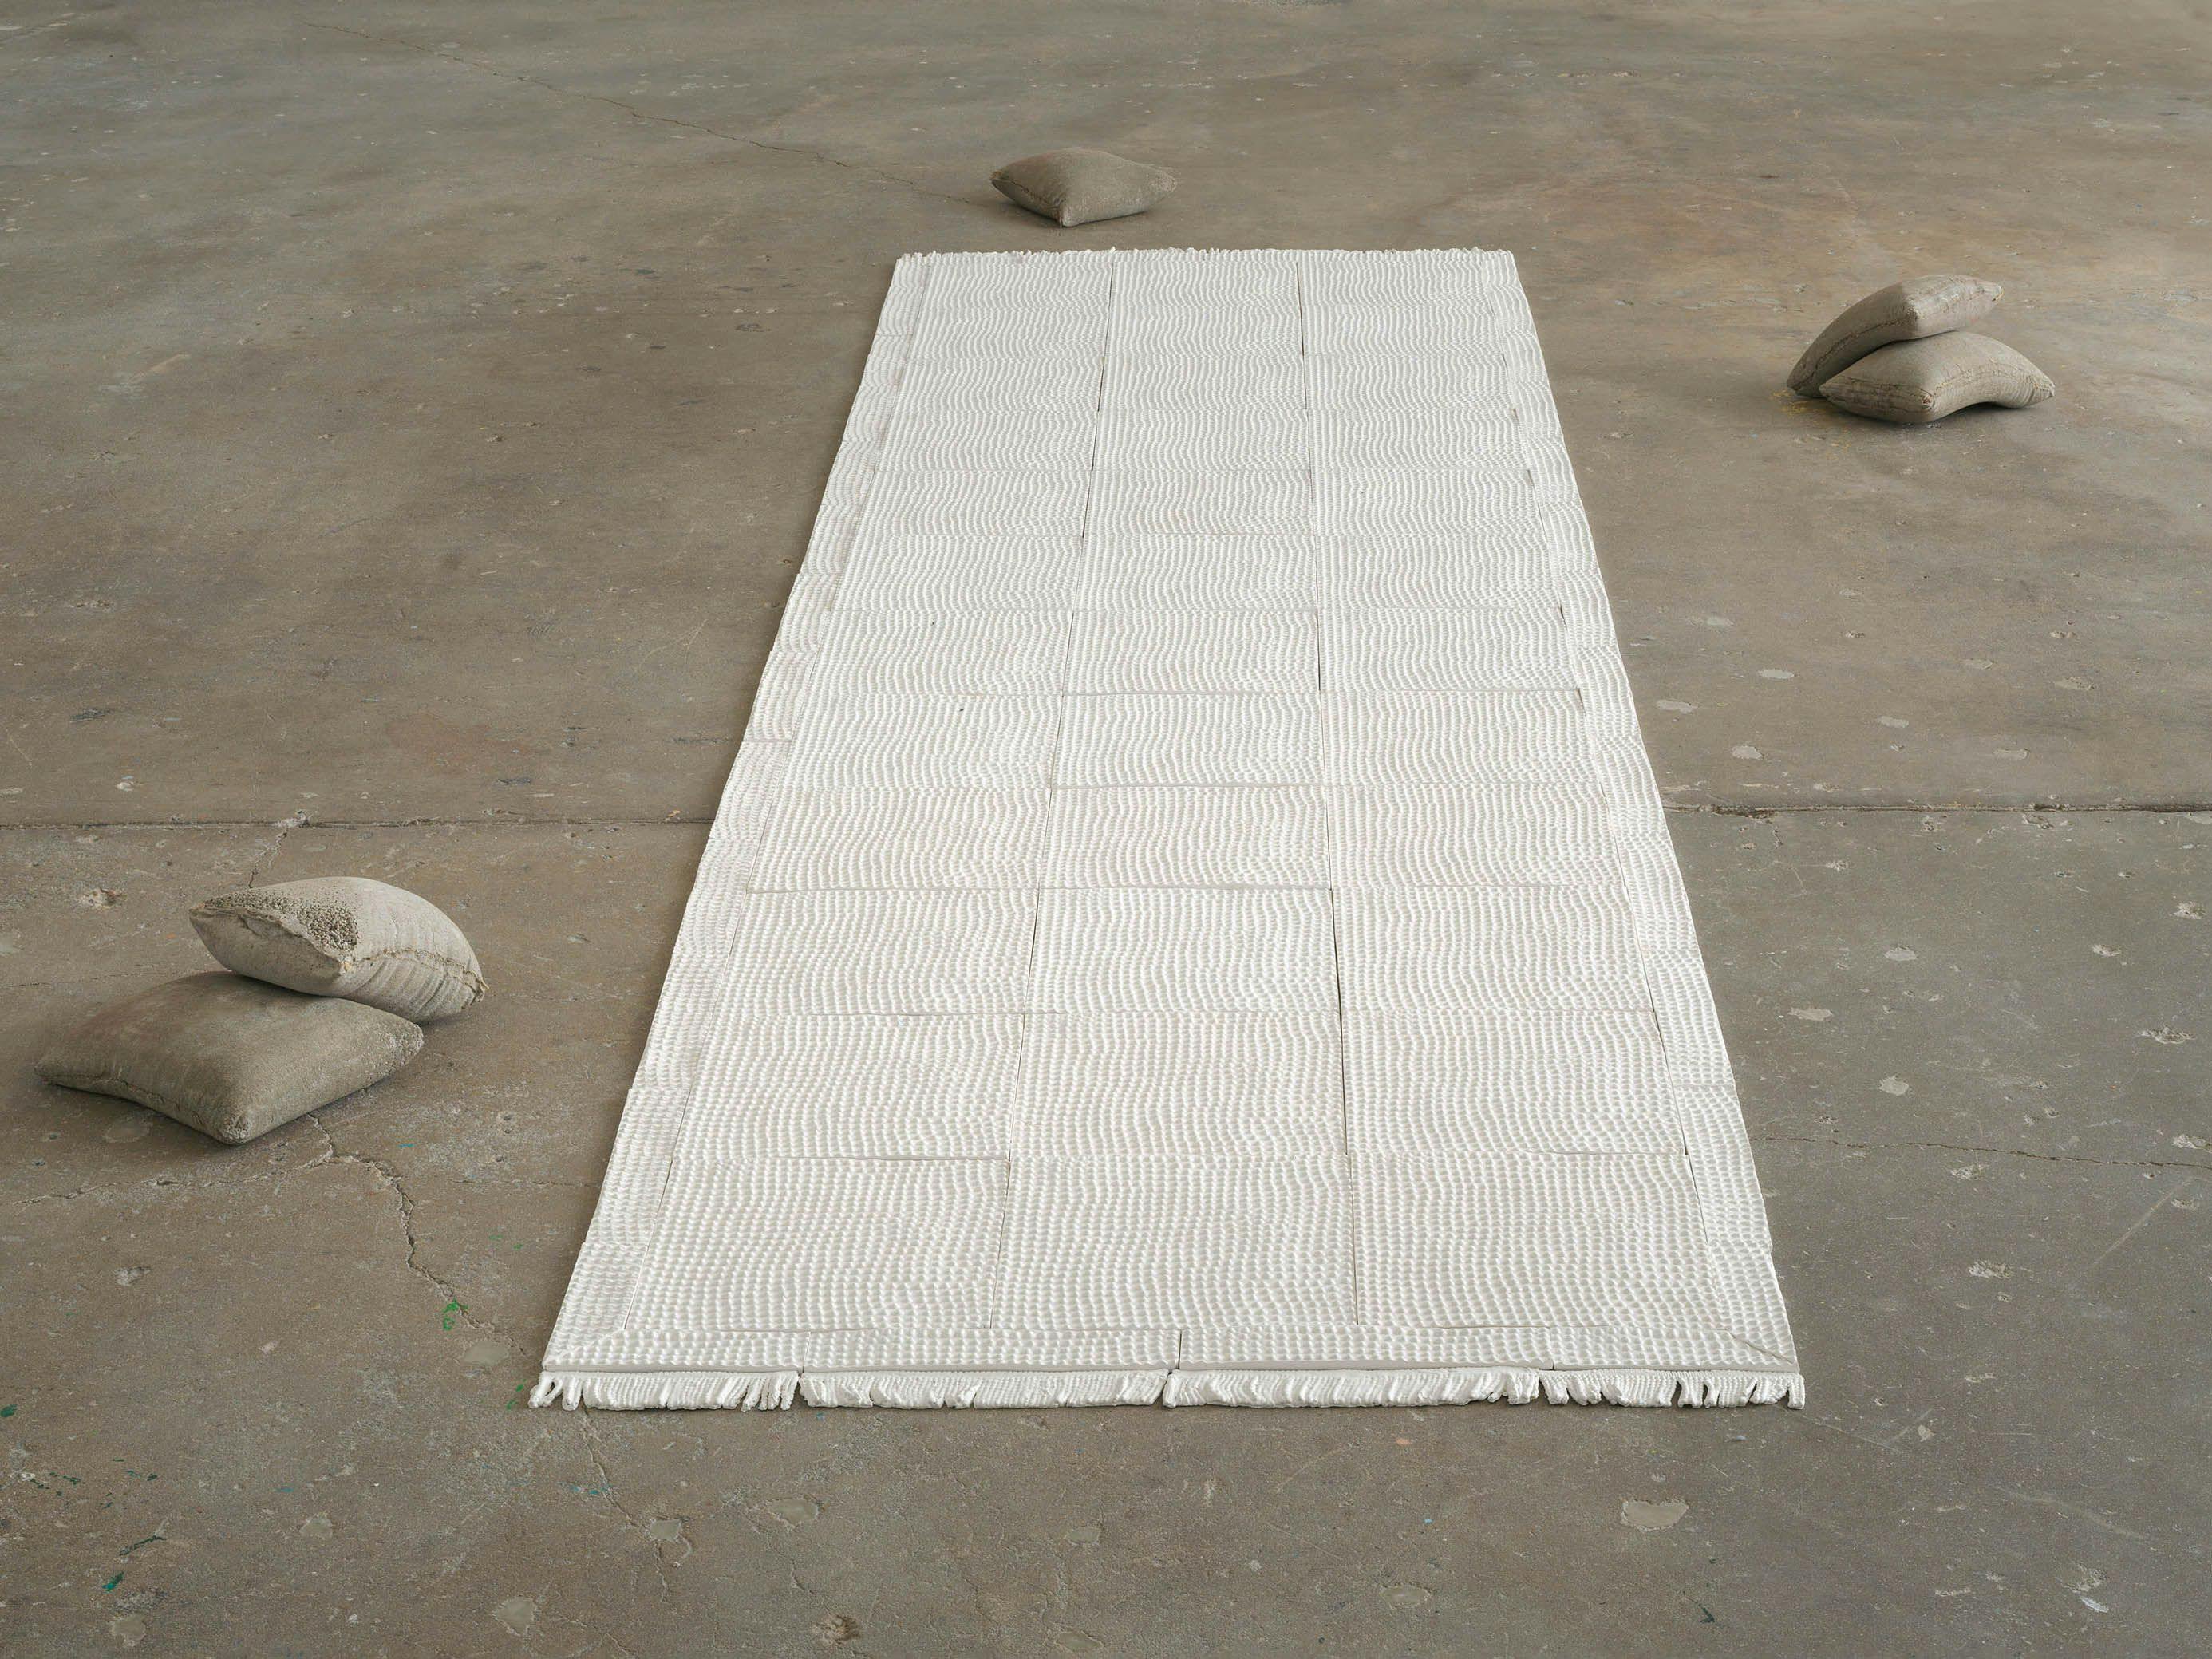 An installation artwork by Haley Darya Parsa, titled Bakhtiari Rug & 300 lbs. of Basmati Rice, dated in 2018 and 2024.